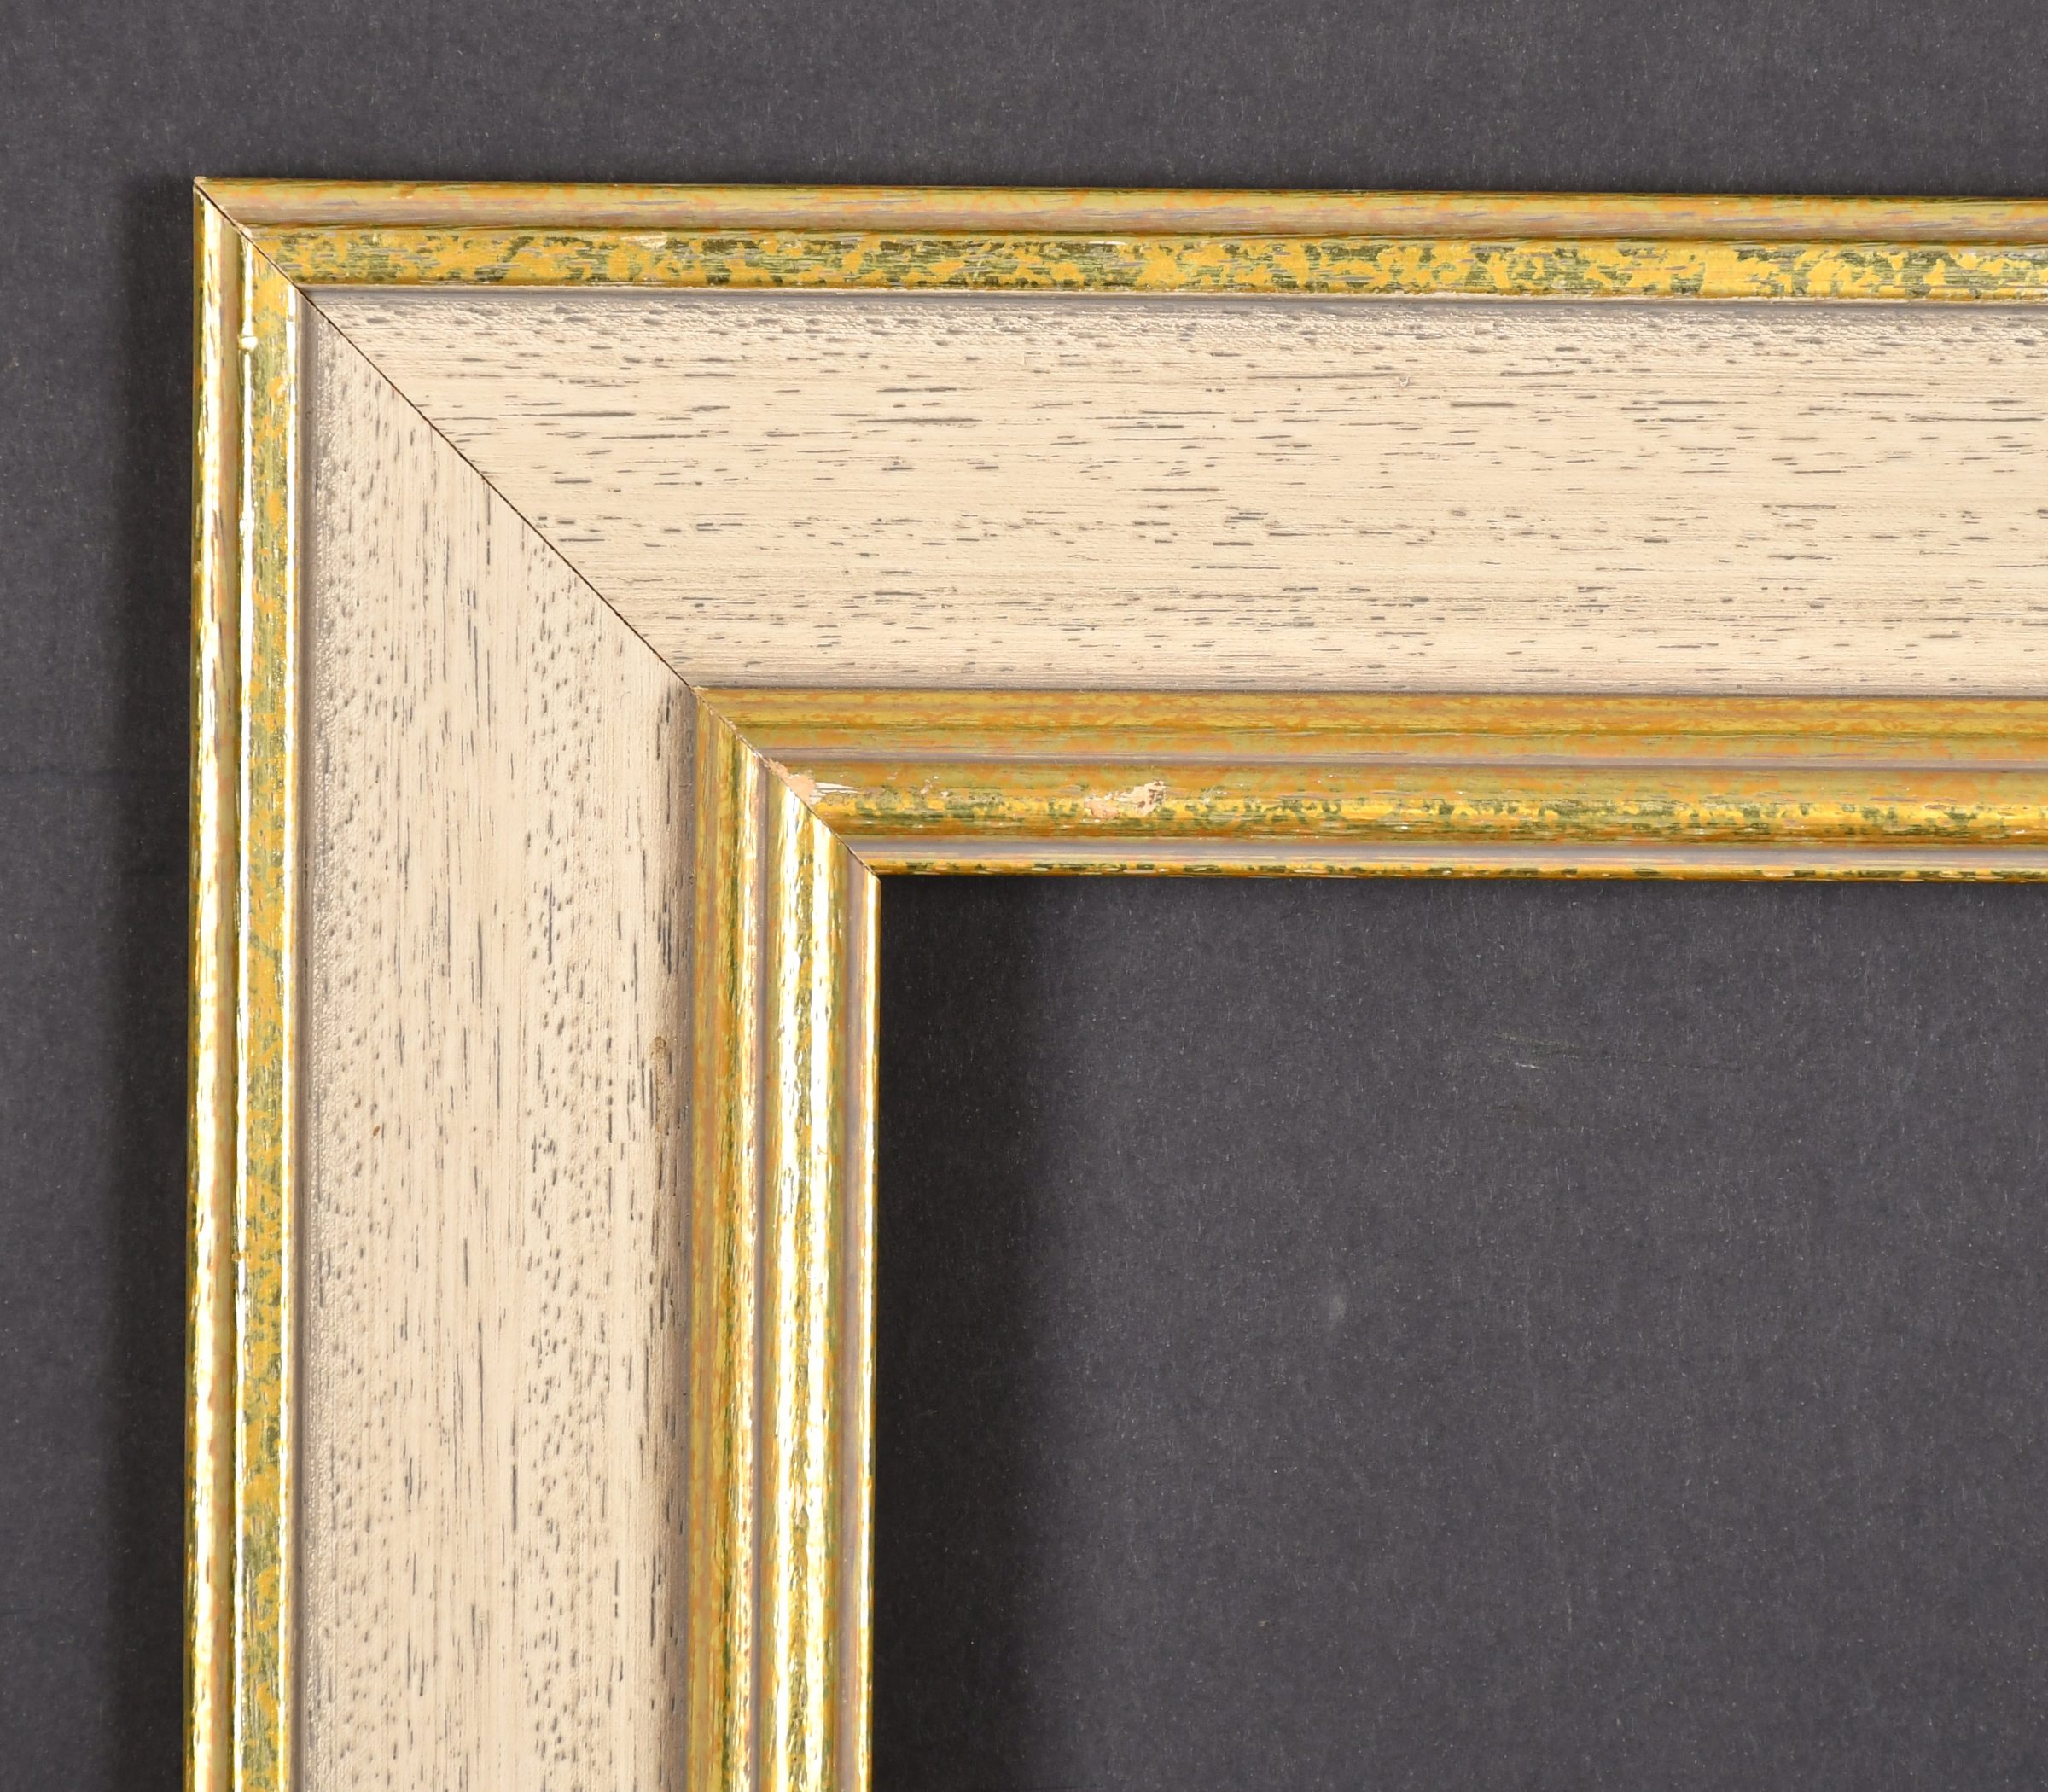 20th Century English School. A Painted Frame, with gilt inner and outer edges, rebate 18" x 10.5" (